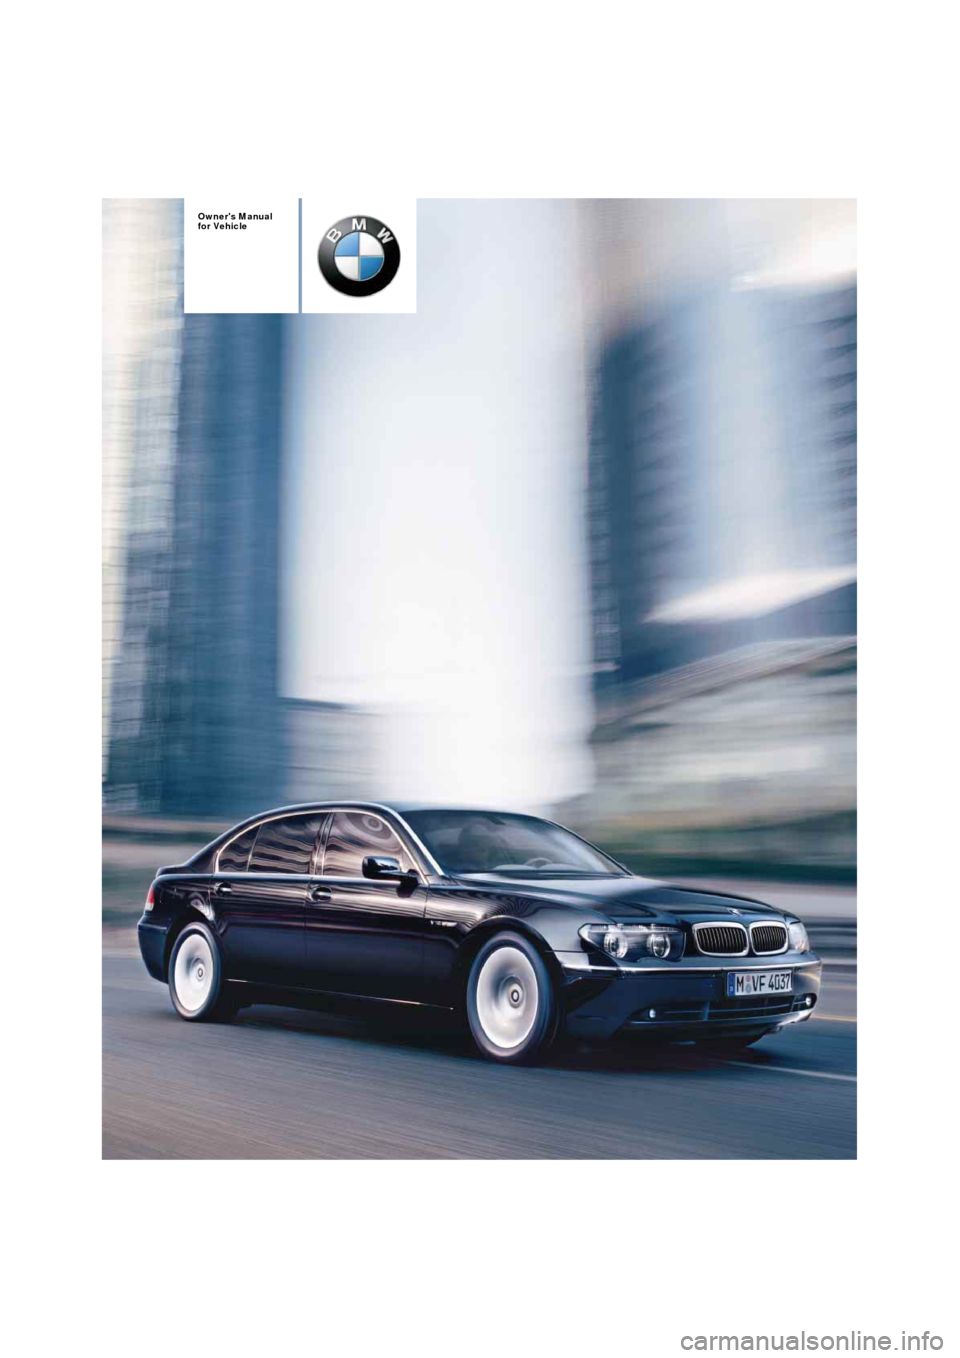 BMW 745Li 2004 E66 Owners Manual  
Owners Manual
for Vehicle 